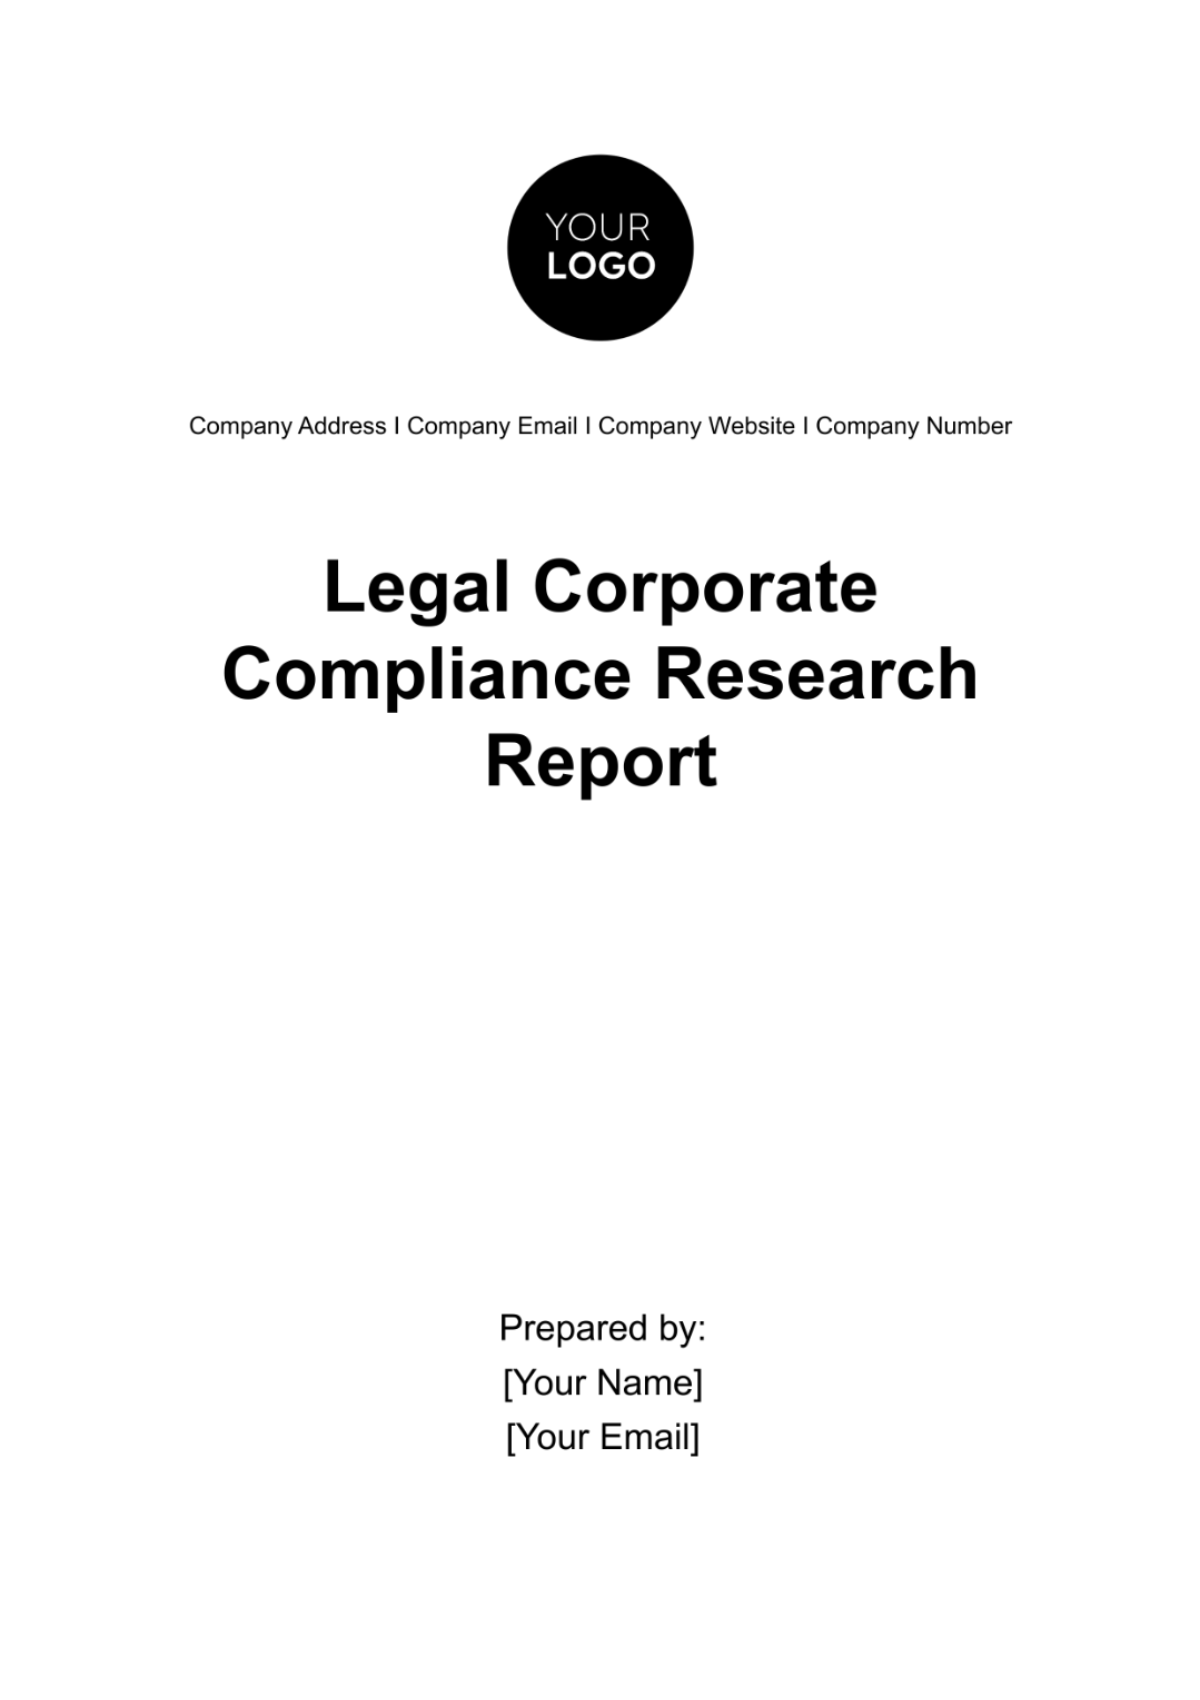 Legal Corporate Compliance Research Report Template